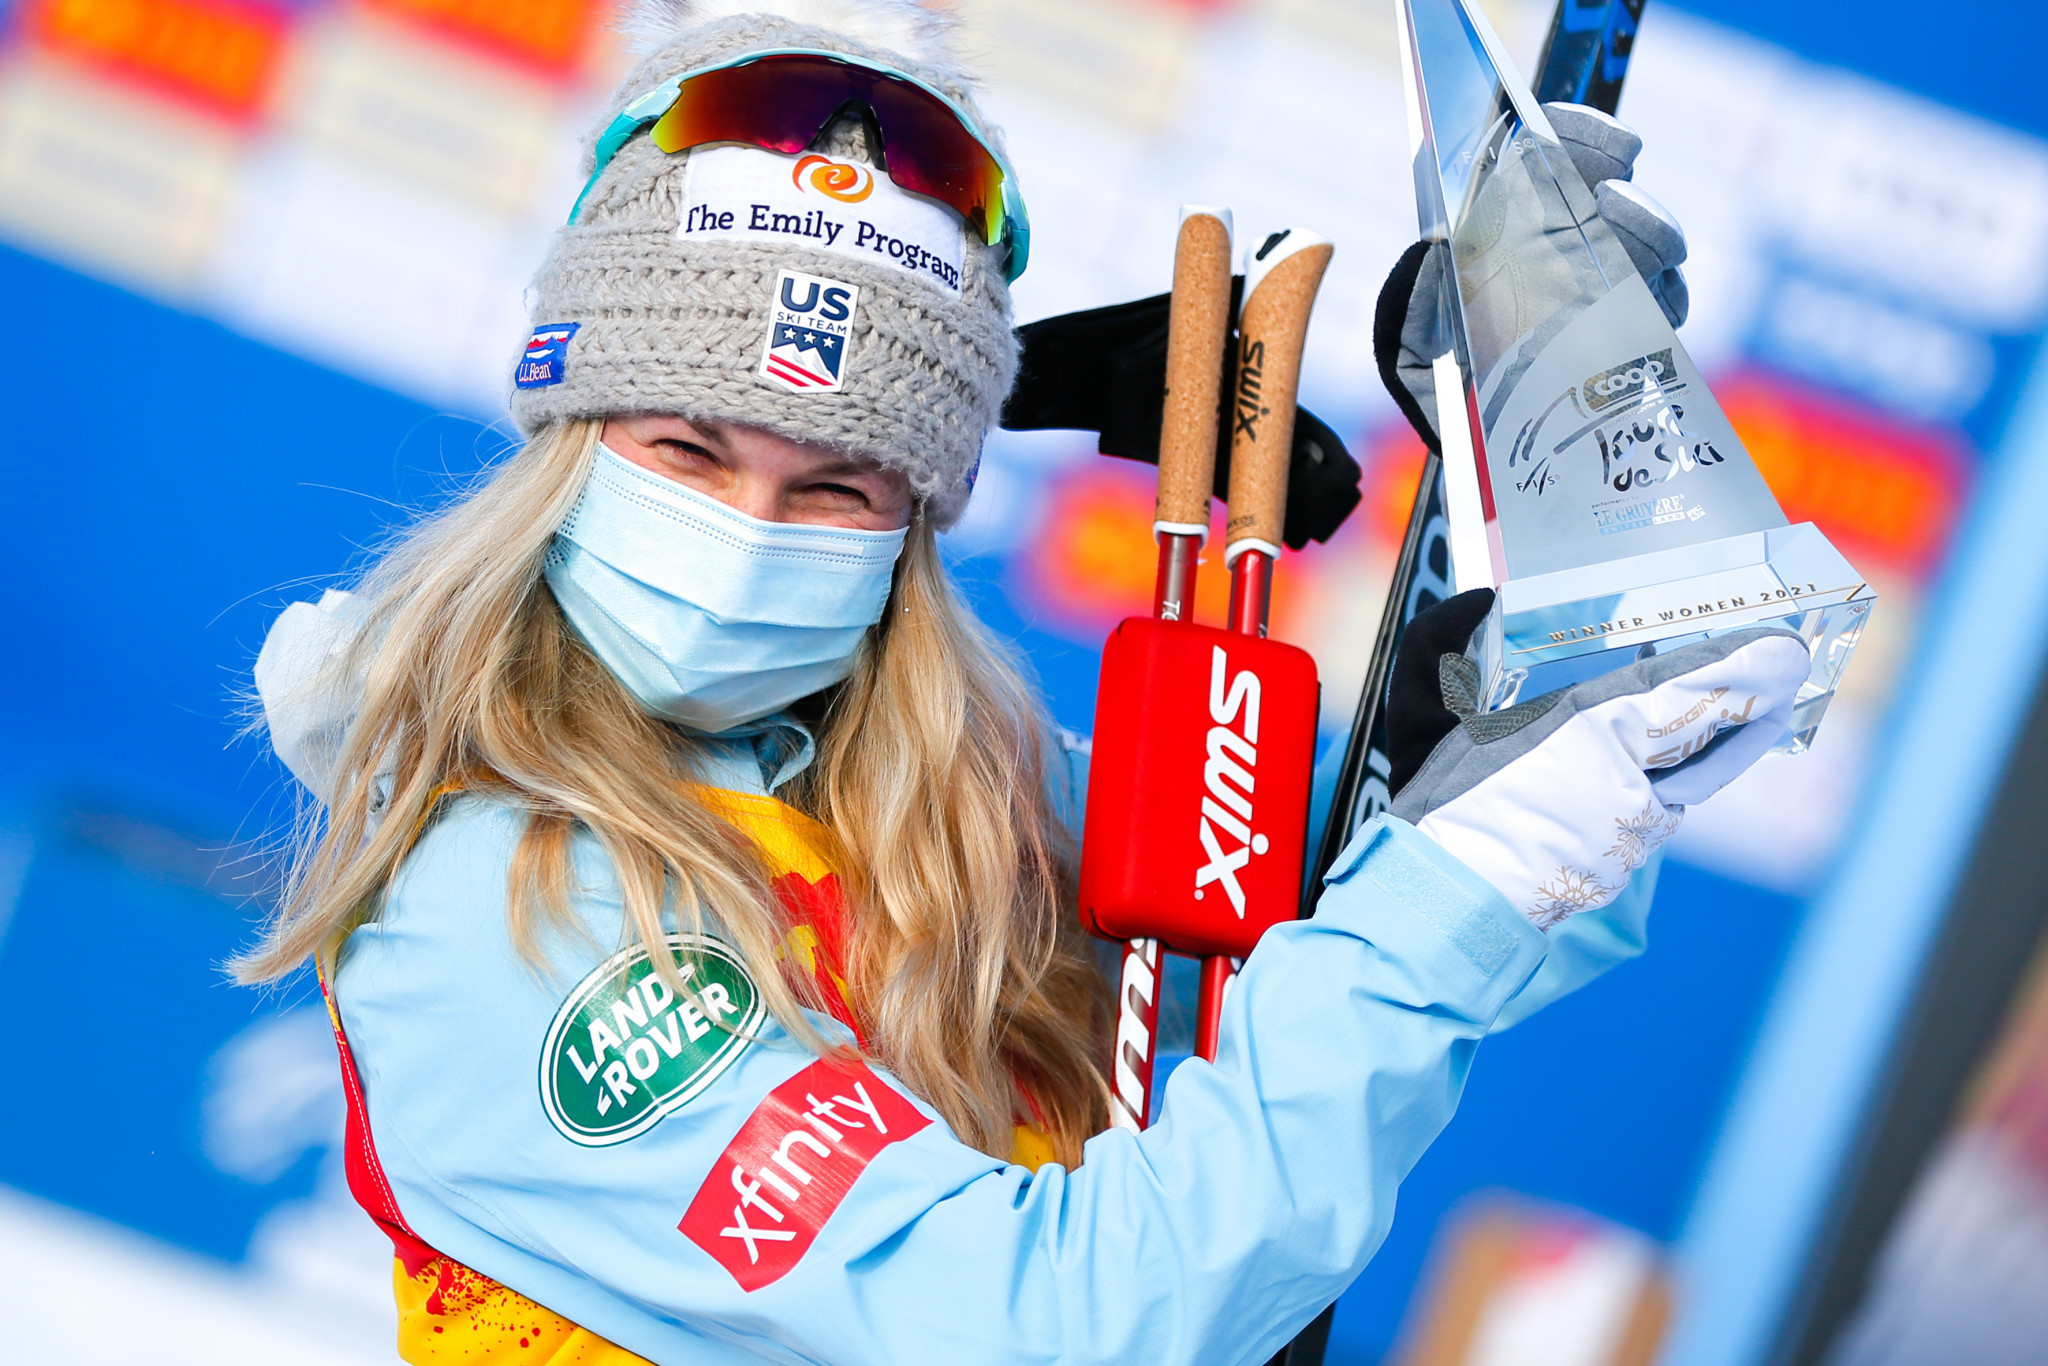 Jessie Diggins of the United States became the first non-European athlete to win the Tour de Ski ©Getty Images